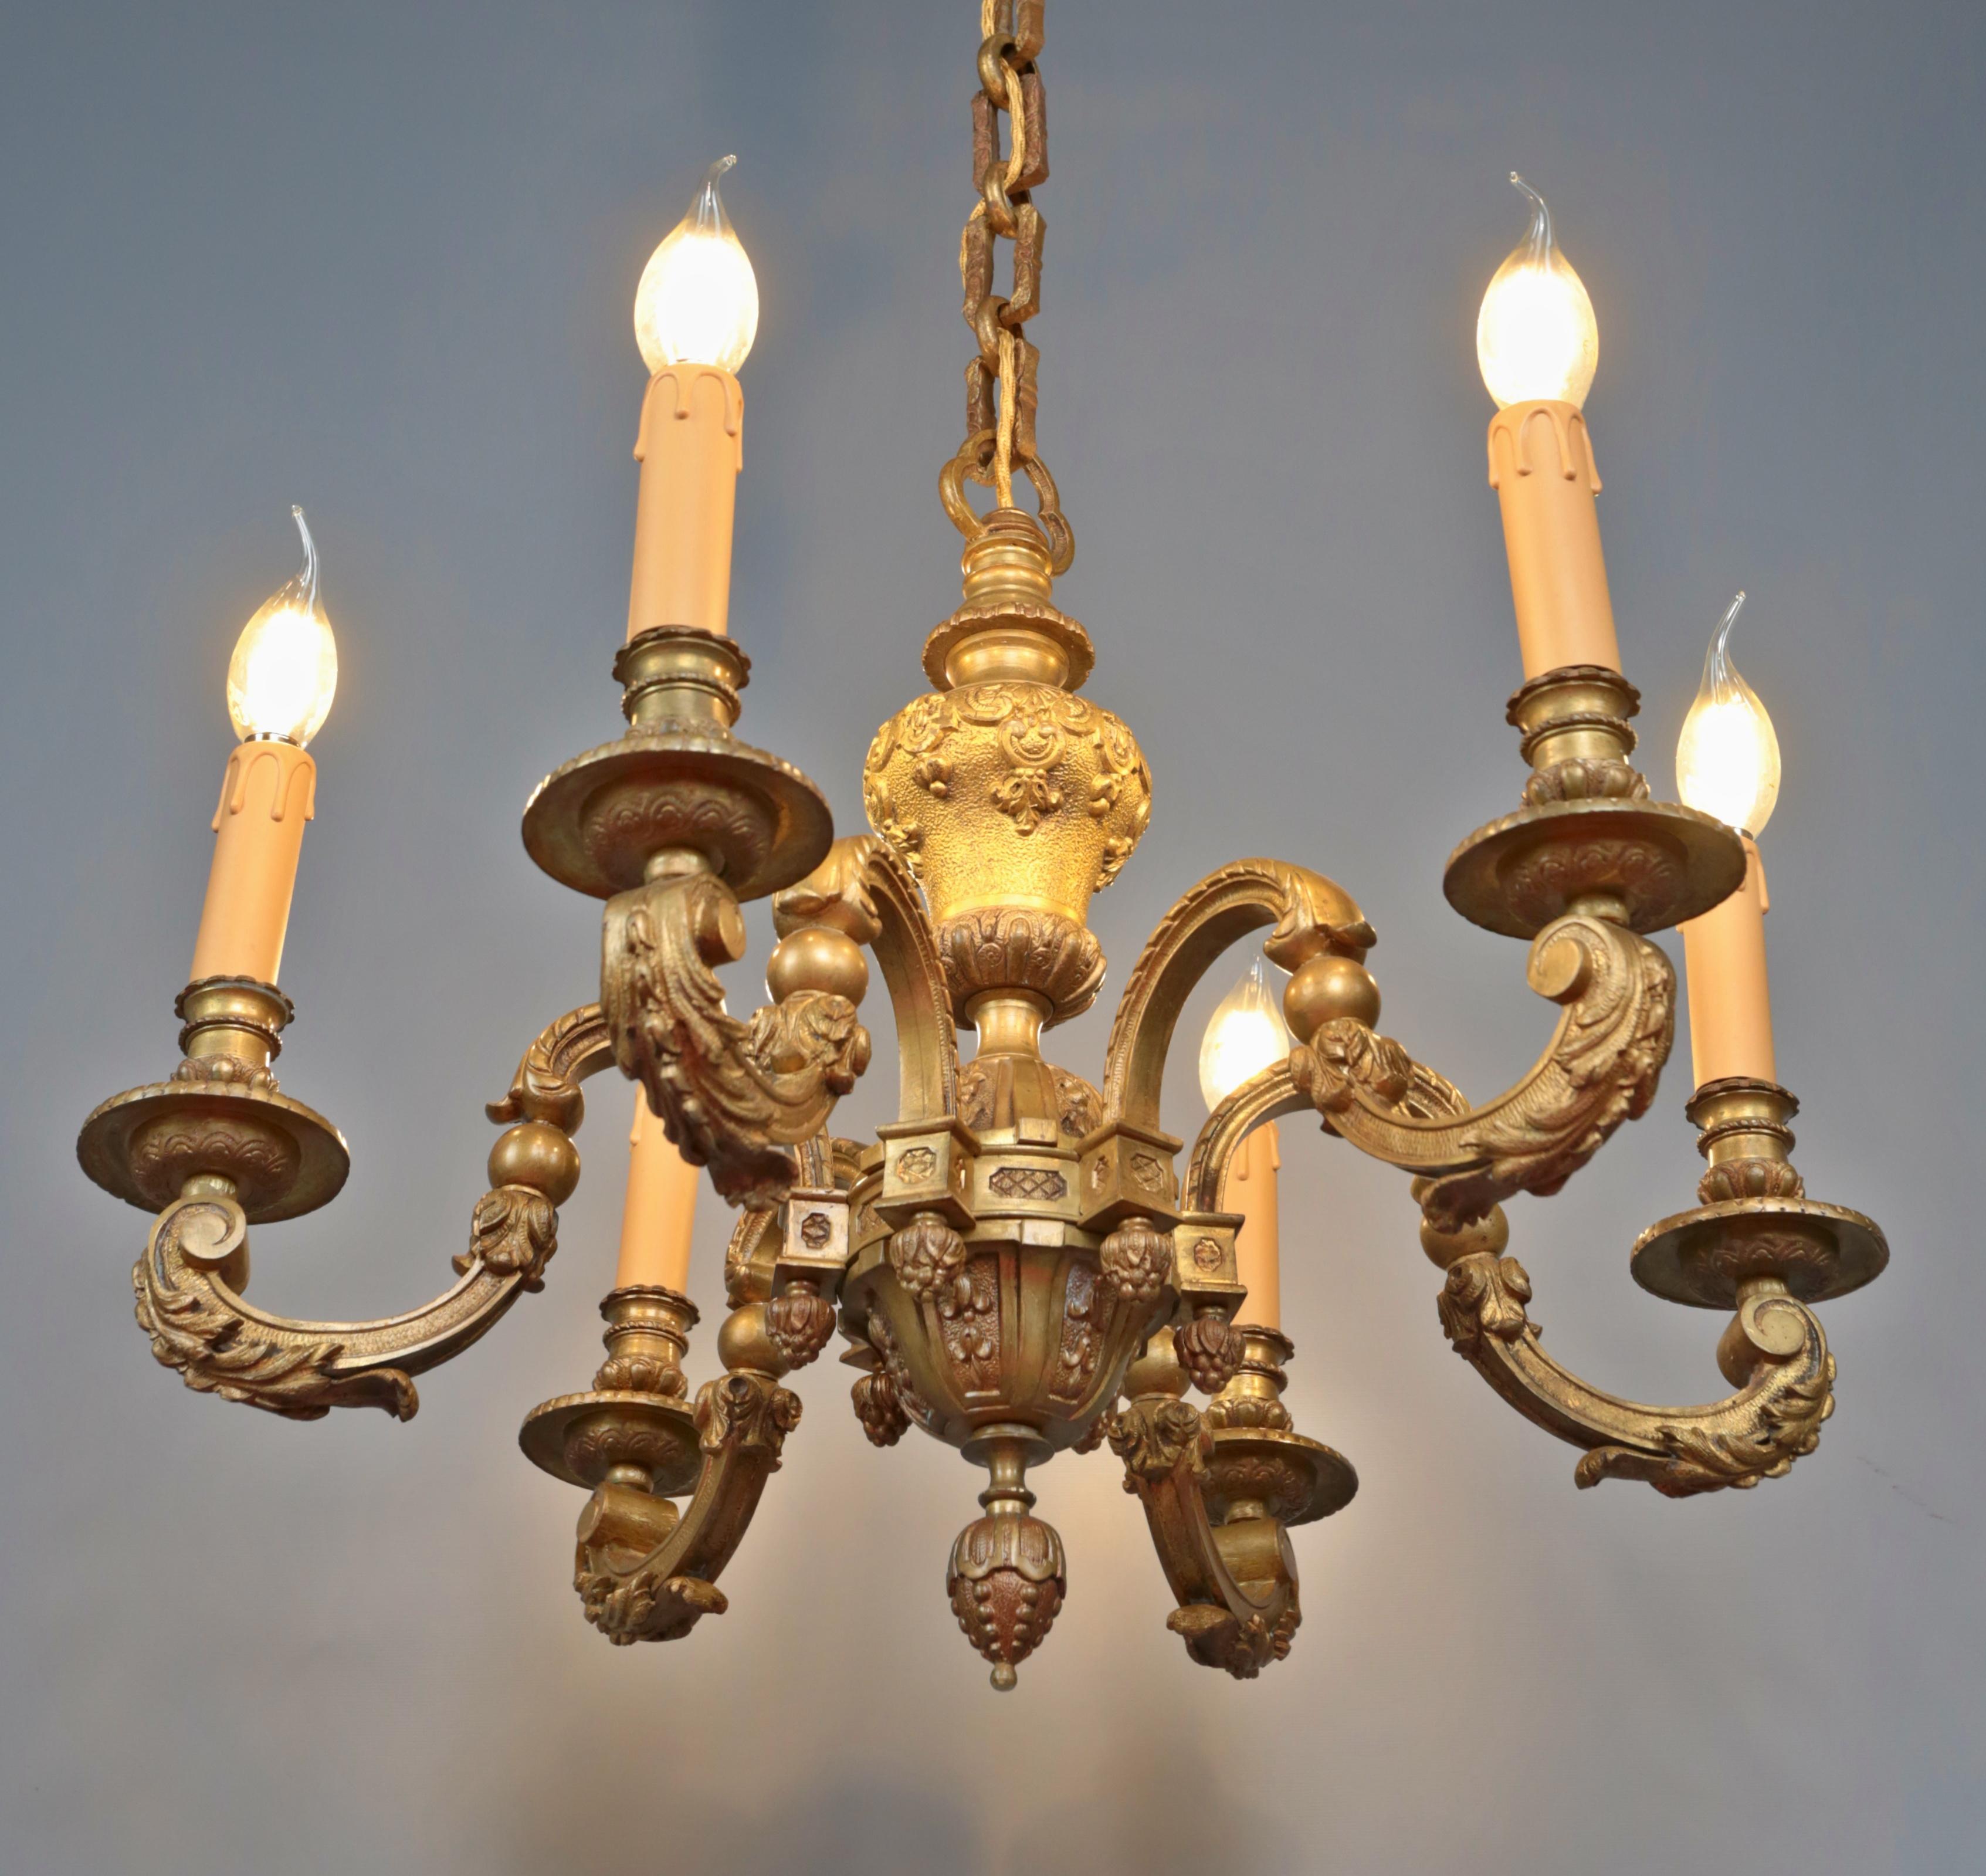 Mazarin bronze chandelier

Antique chandelier from the 19th century in the style of Louis XIV. Gilded bronze. The chandelier has a new supply cable in the old style with fabric covering in gold color, 3 line with grounding. The chandelier is for 6